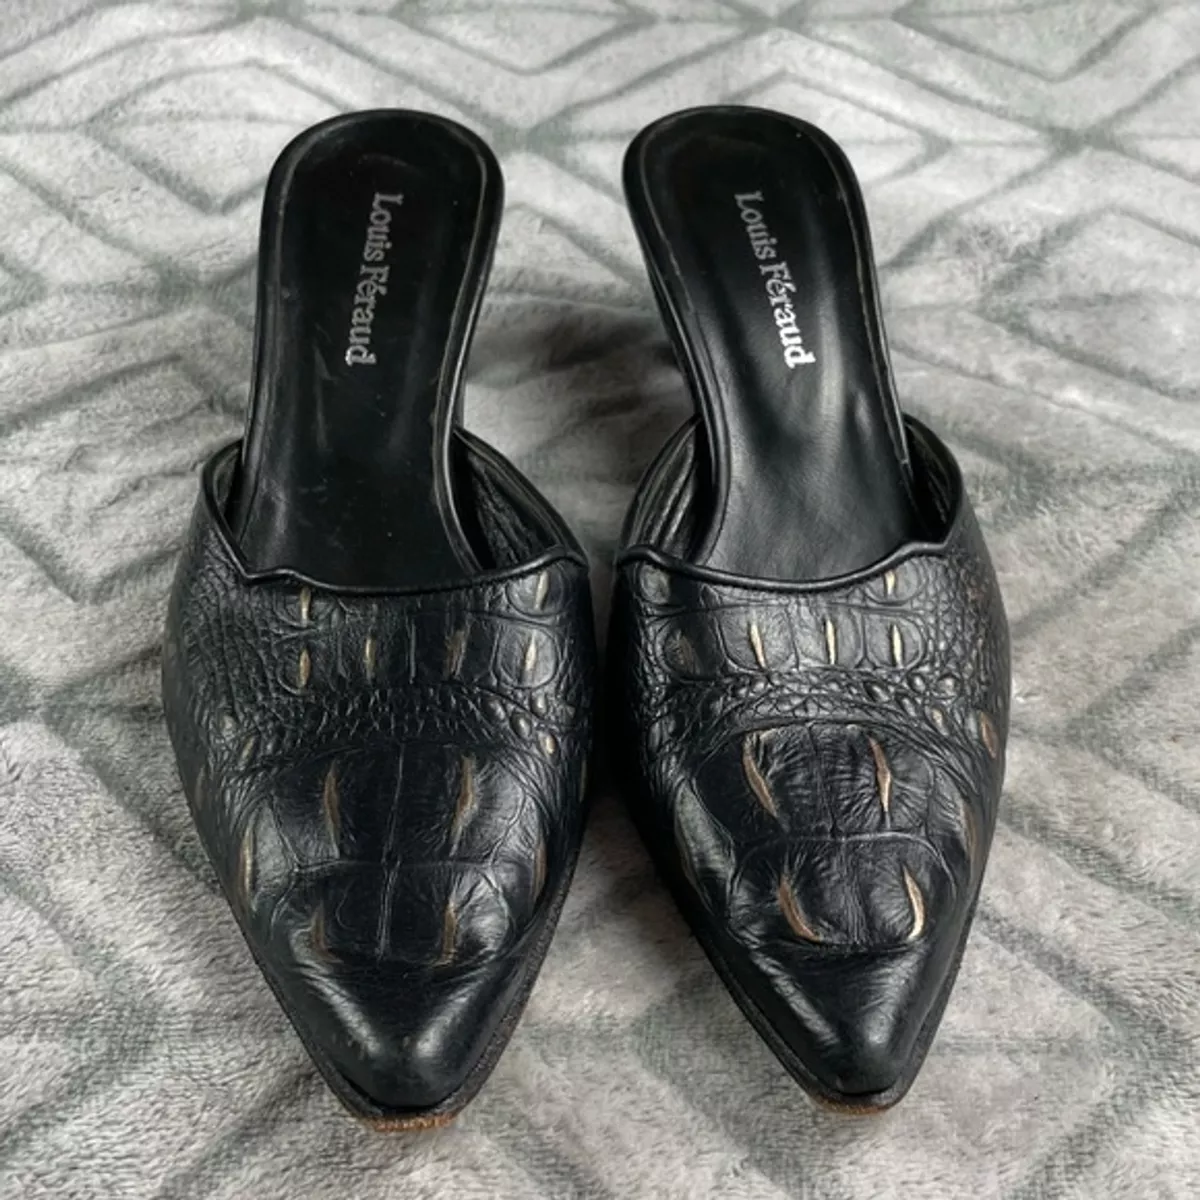 Vintage Louis Feraud crocodile leather black mules size 6 with 2 inch heels